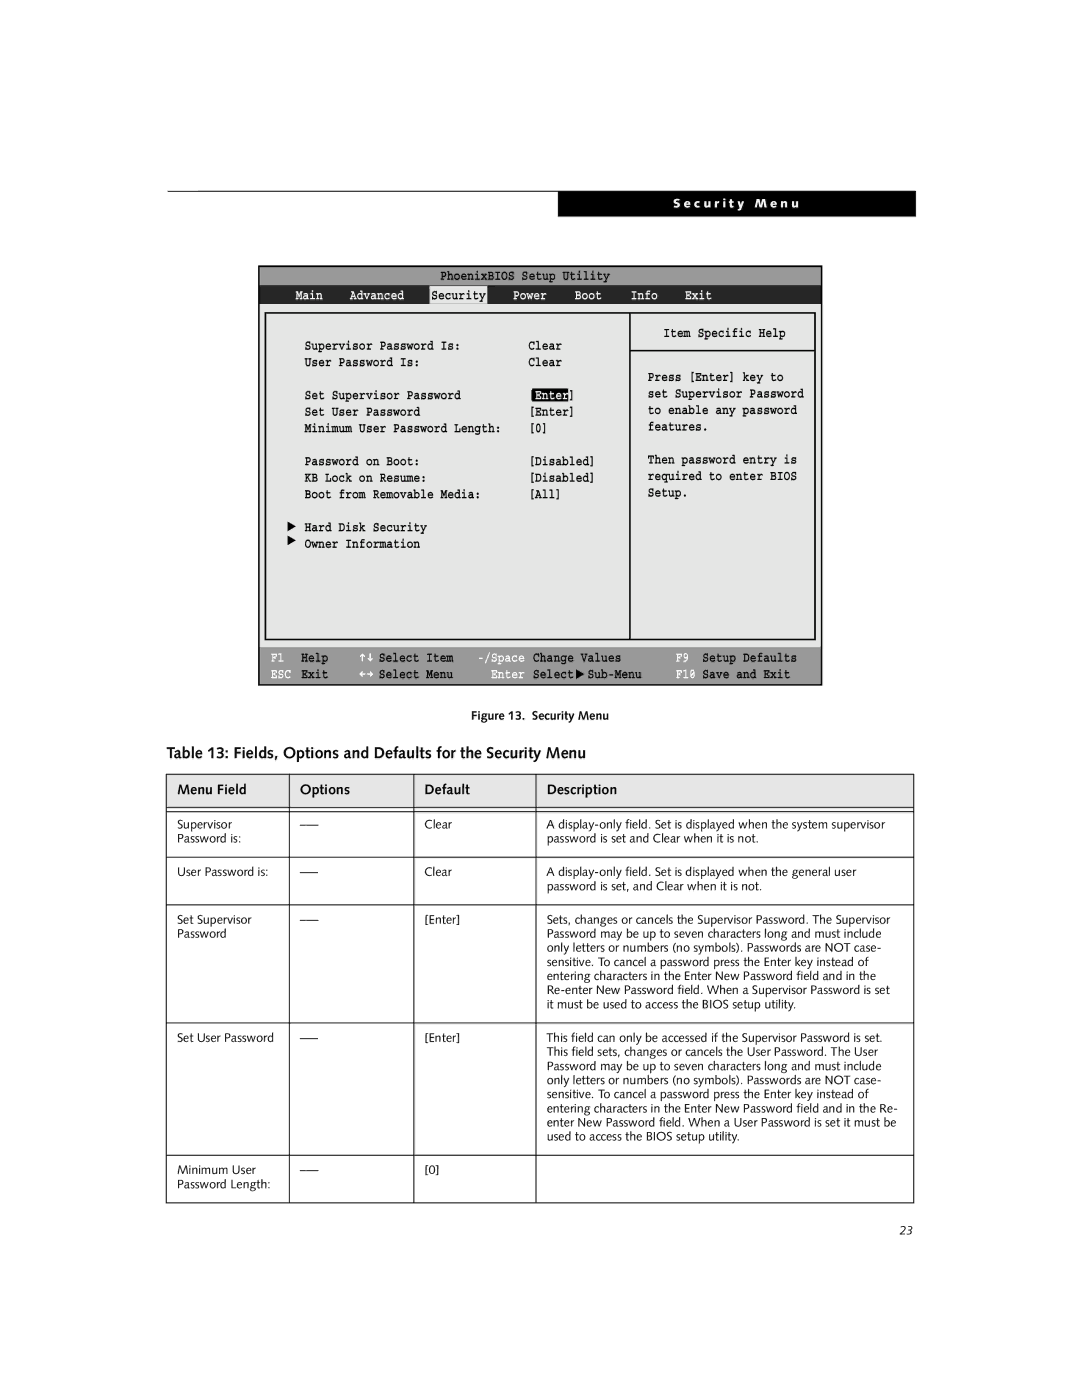 Fujitsu Siemens Computers C2110 manual Fields, Options and Defaults for the Security Menu, Main Advanced, Power Boot, Exit 